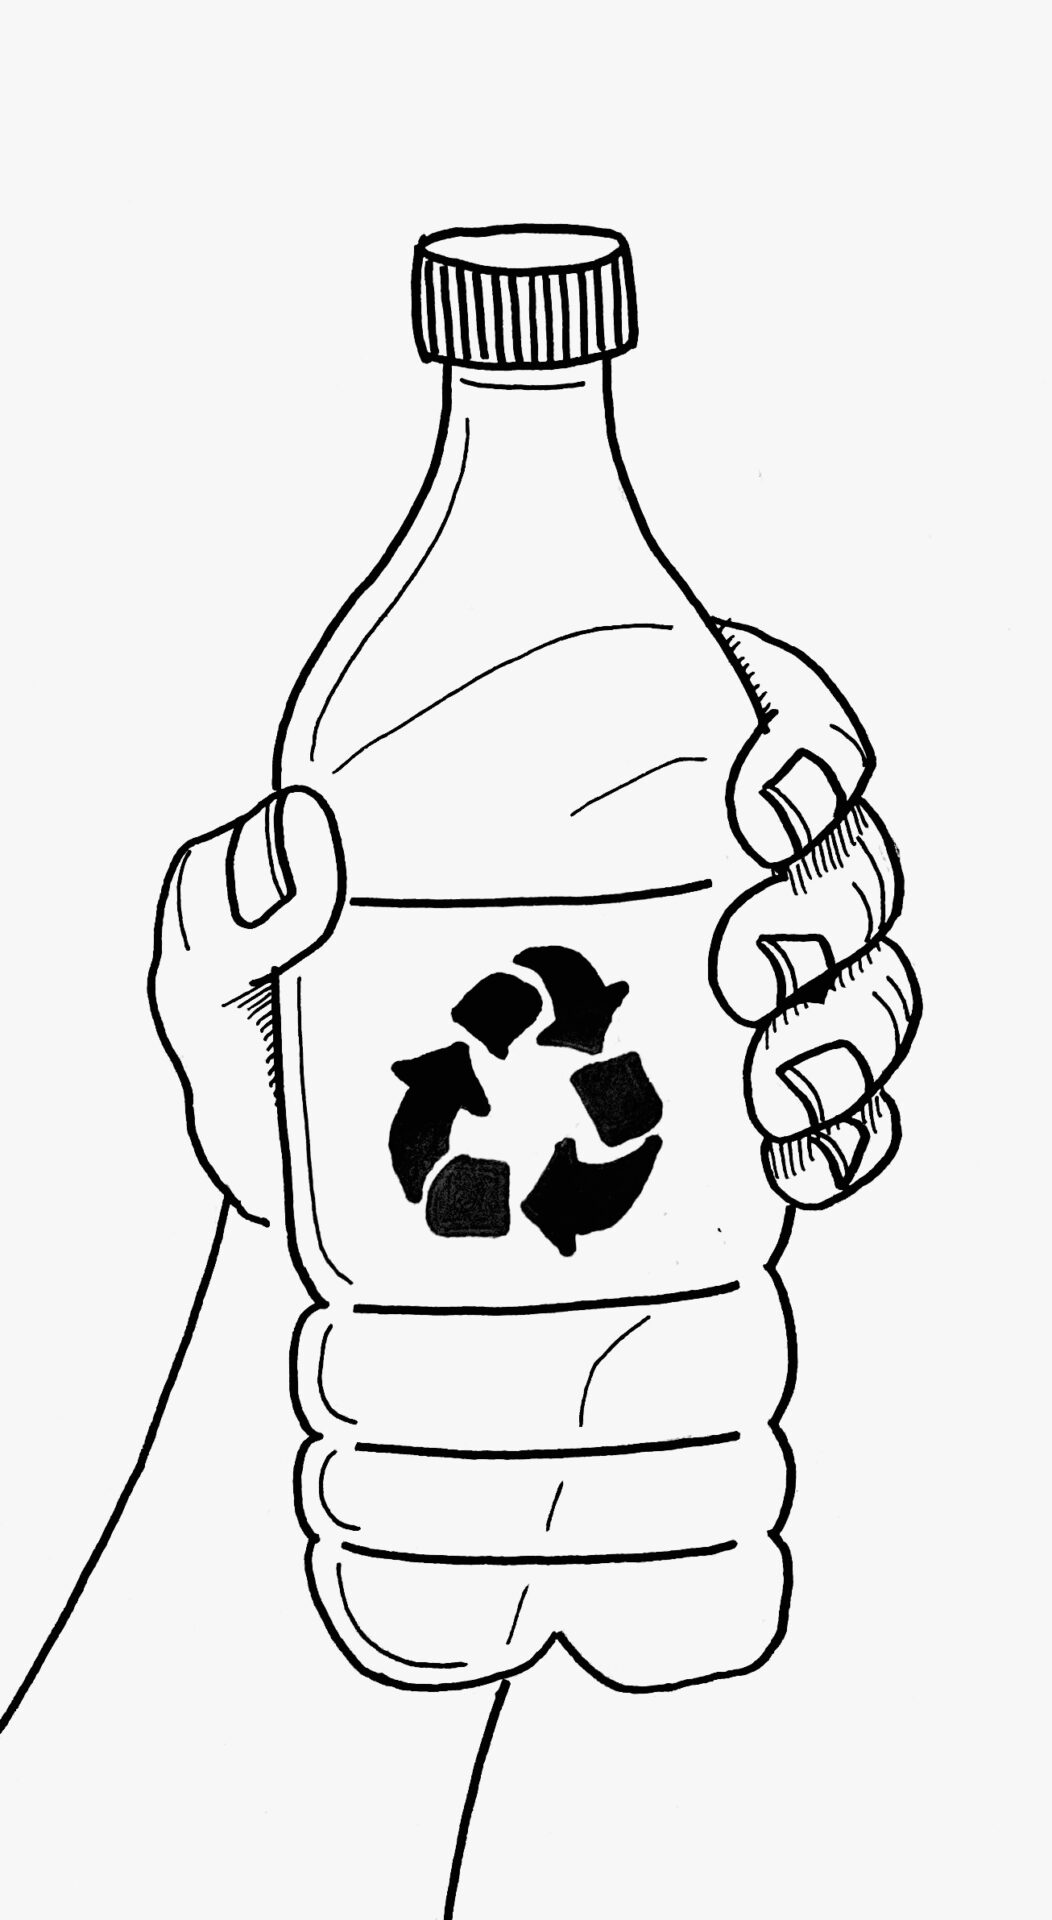 An image of a plastic bottle with a recycling symbol on the label.